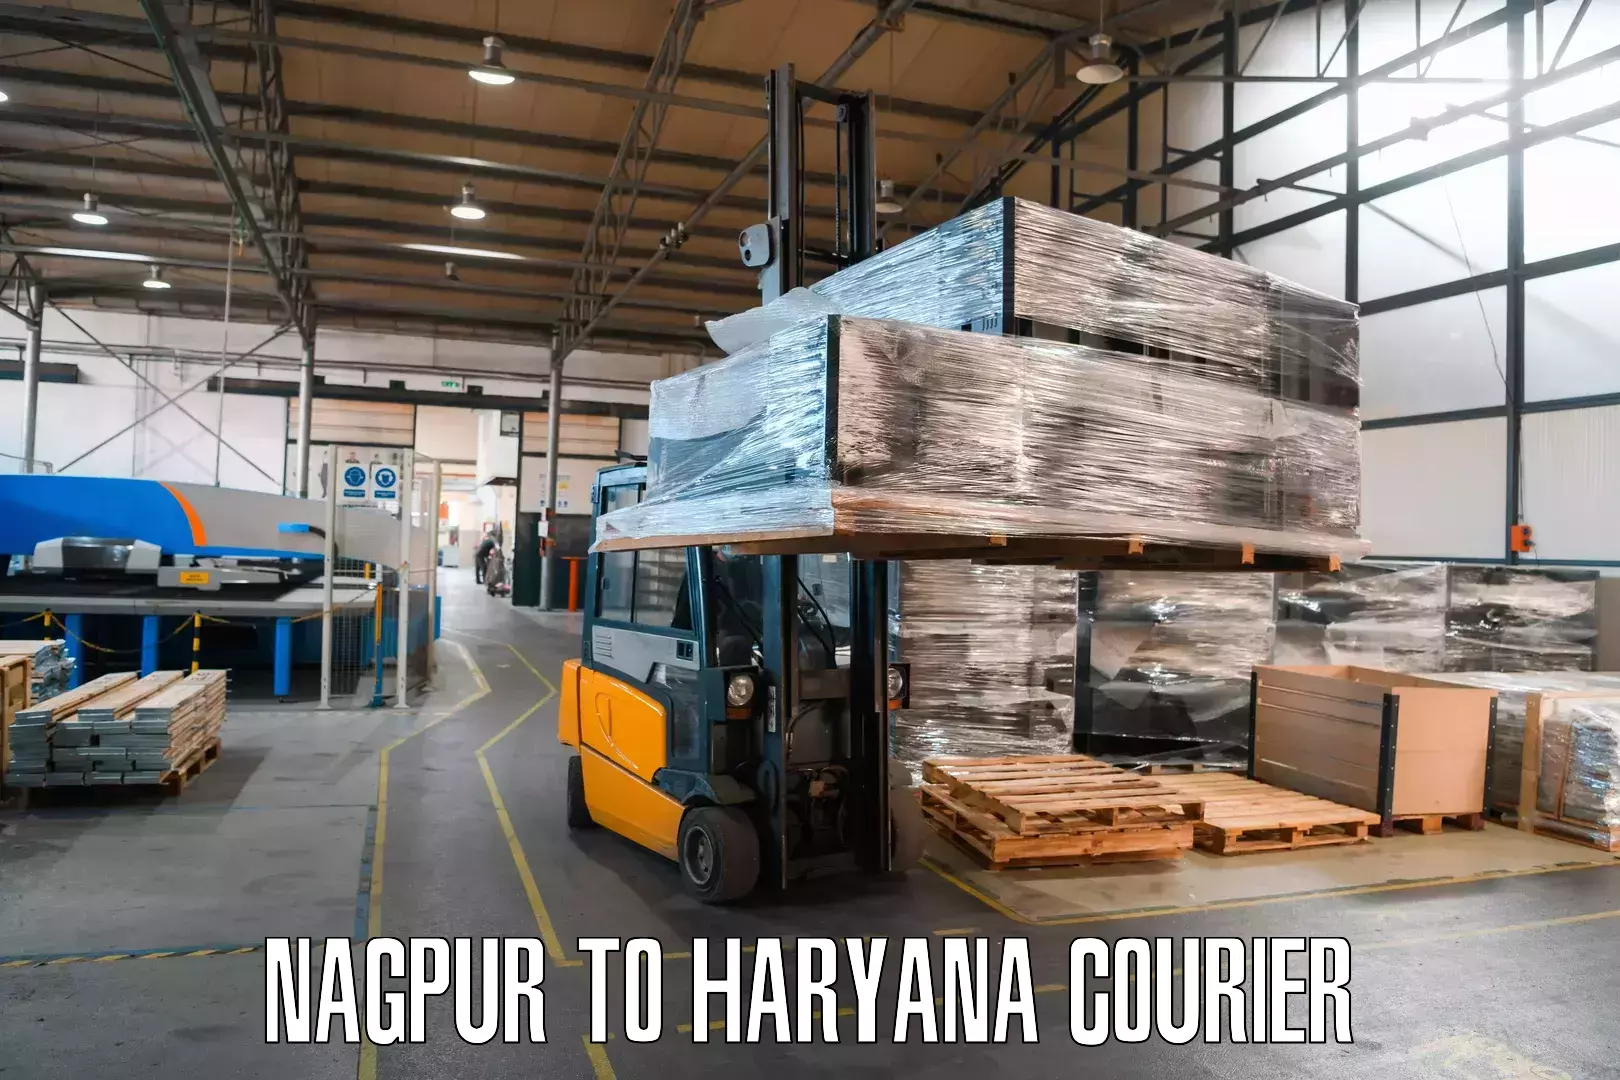 State-of-the-art courier technology Nagpur to Charkhi Dadri